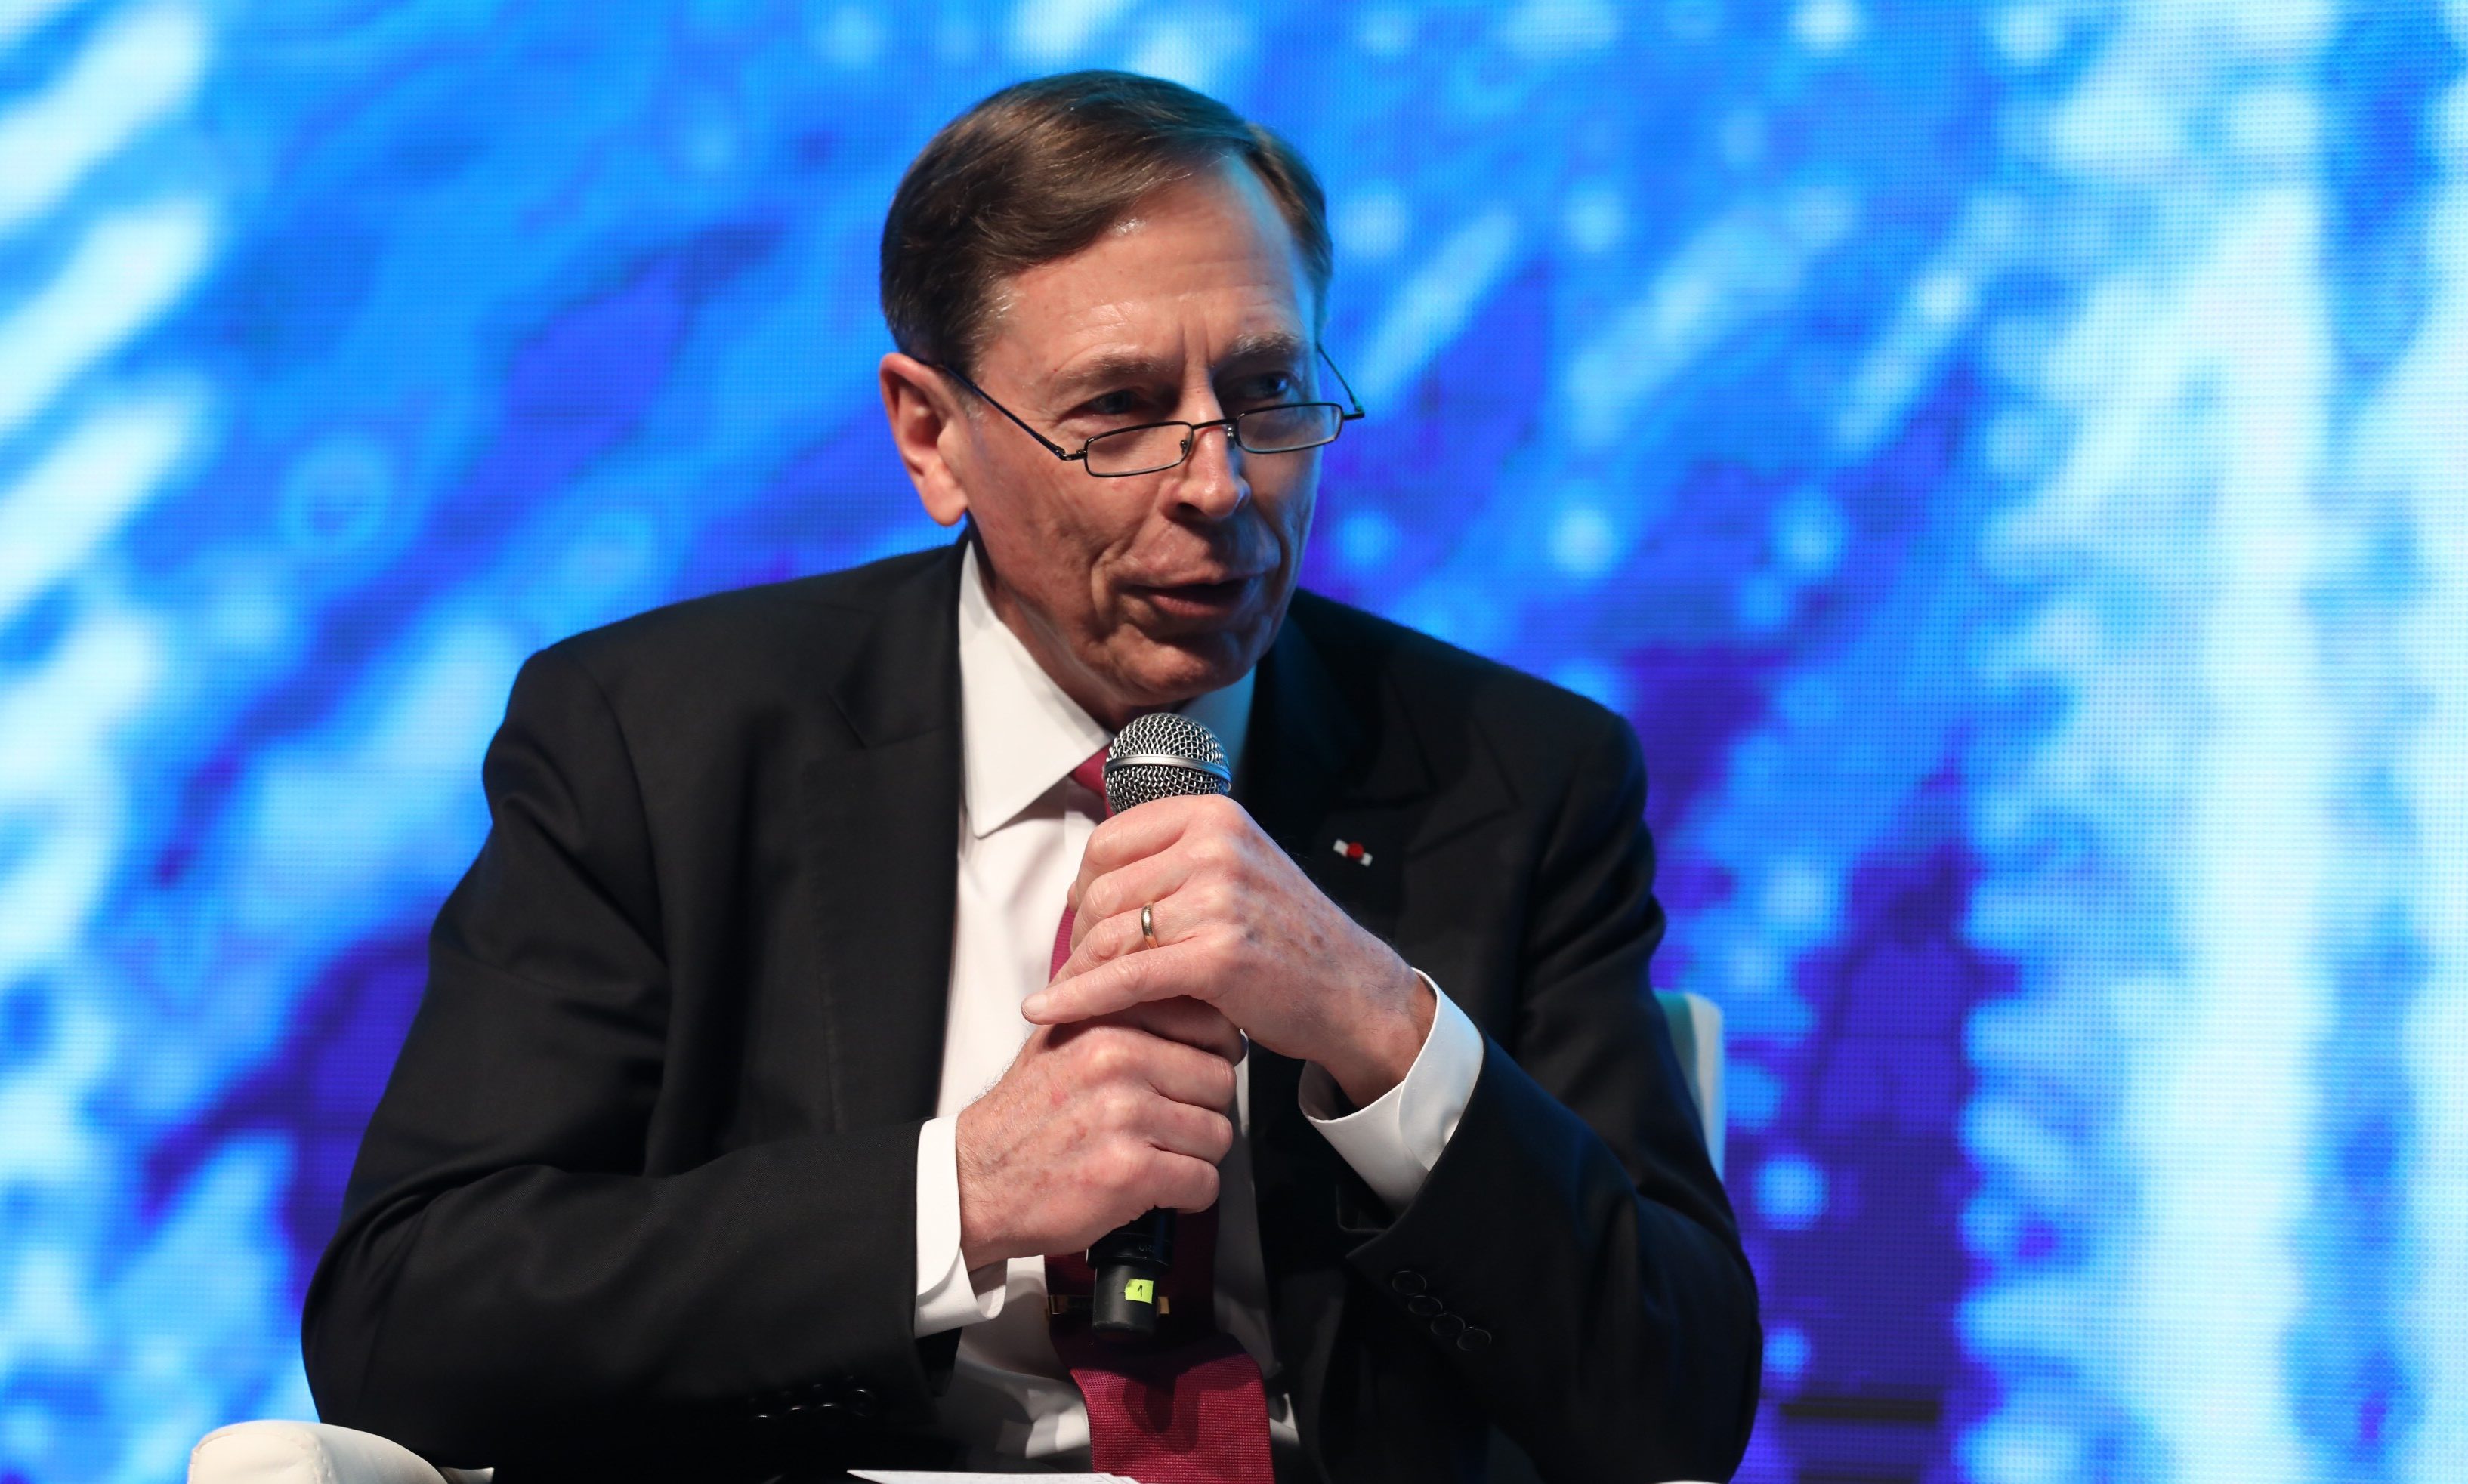 Israel Is a Small Country, But A Cyber Superpower, Says Ex-CIA Director At CyberTech 2018